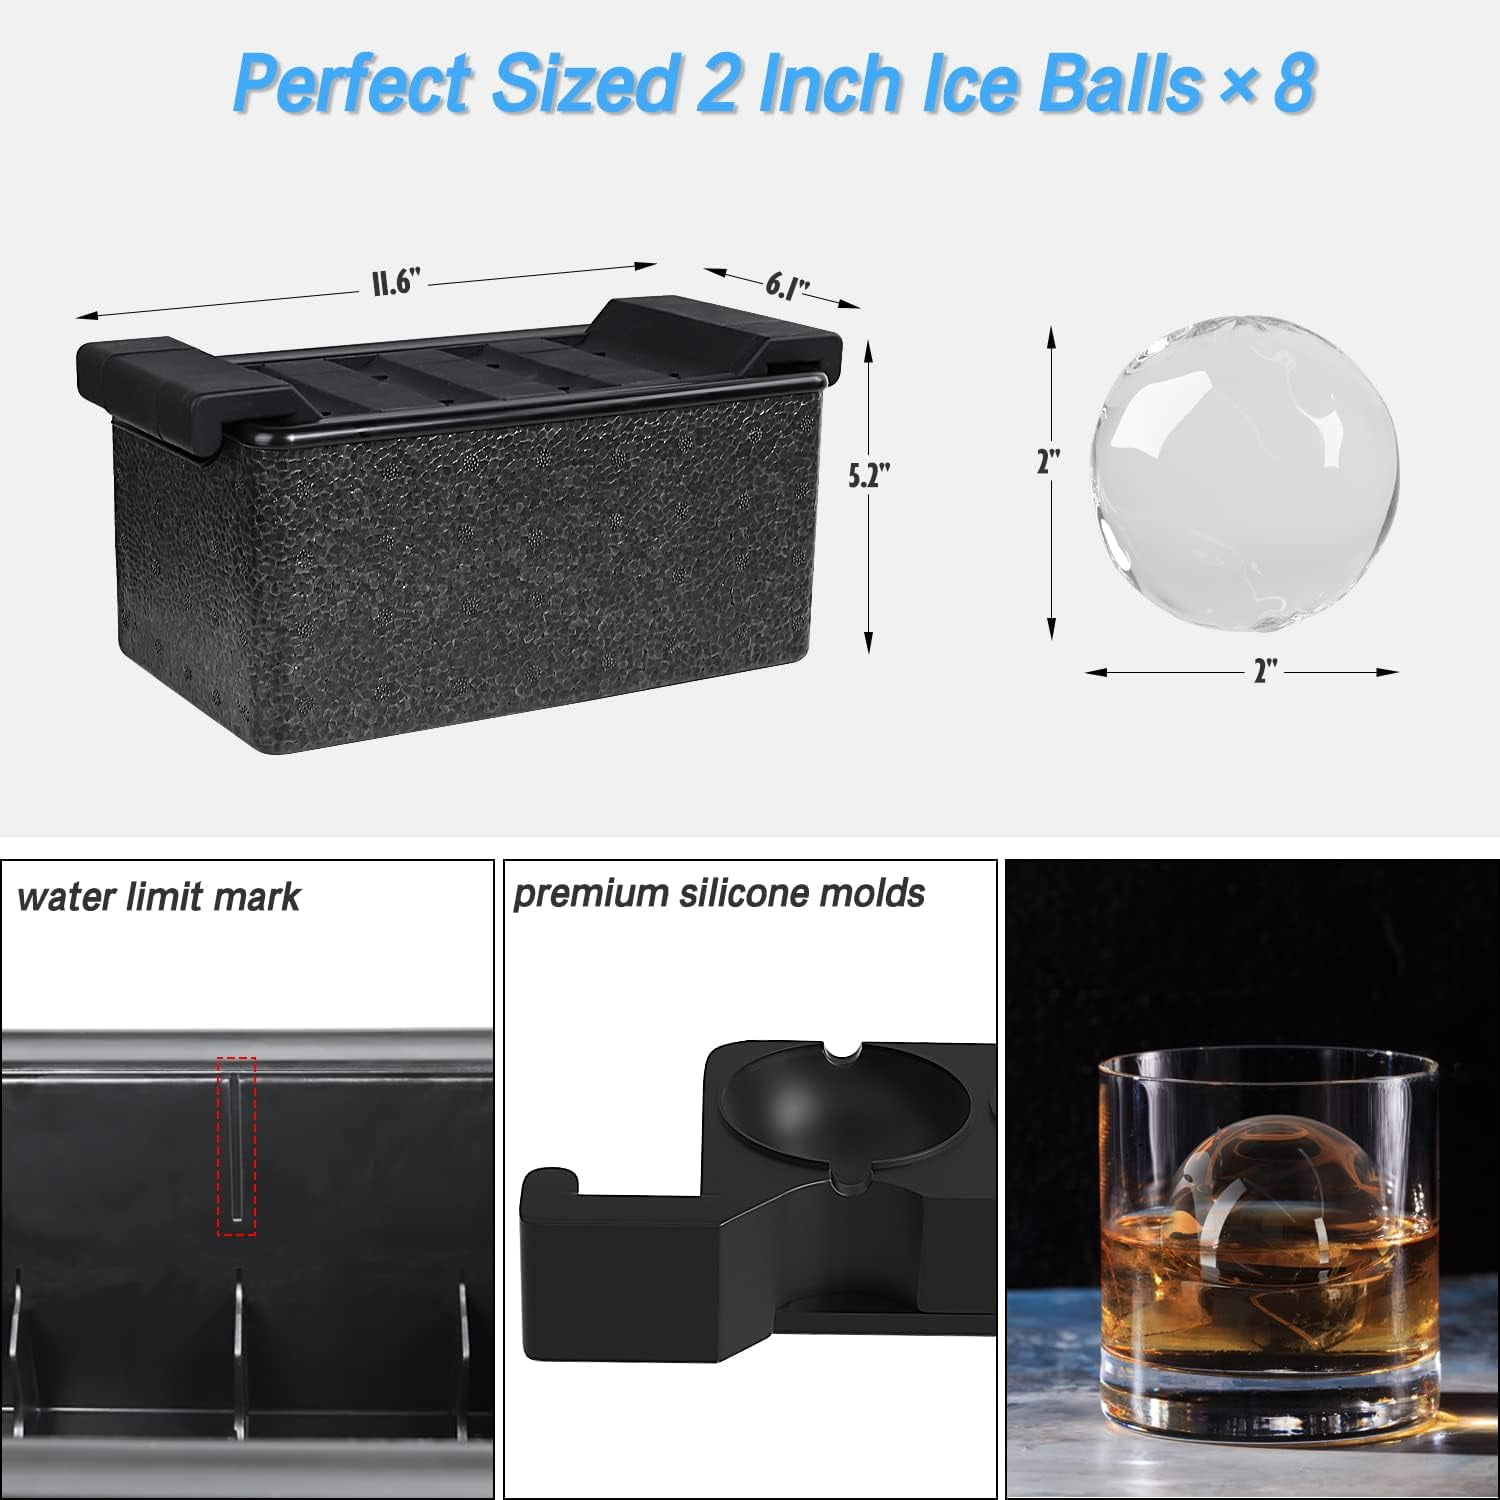 Longzon Crystal Clear Ice Ball Maker Mold NEW Comes With Instructions